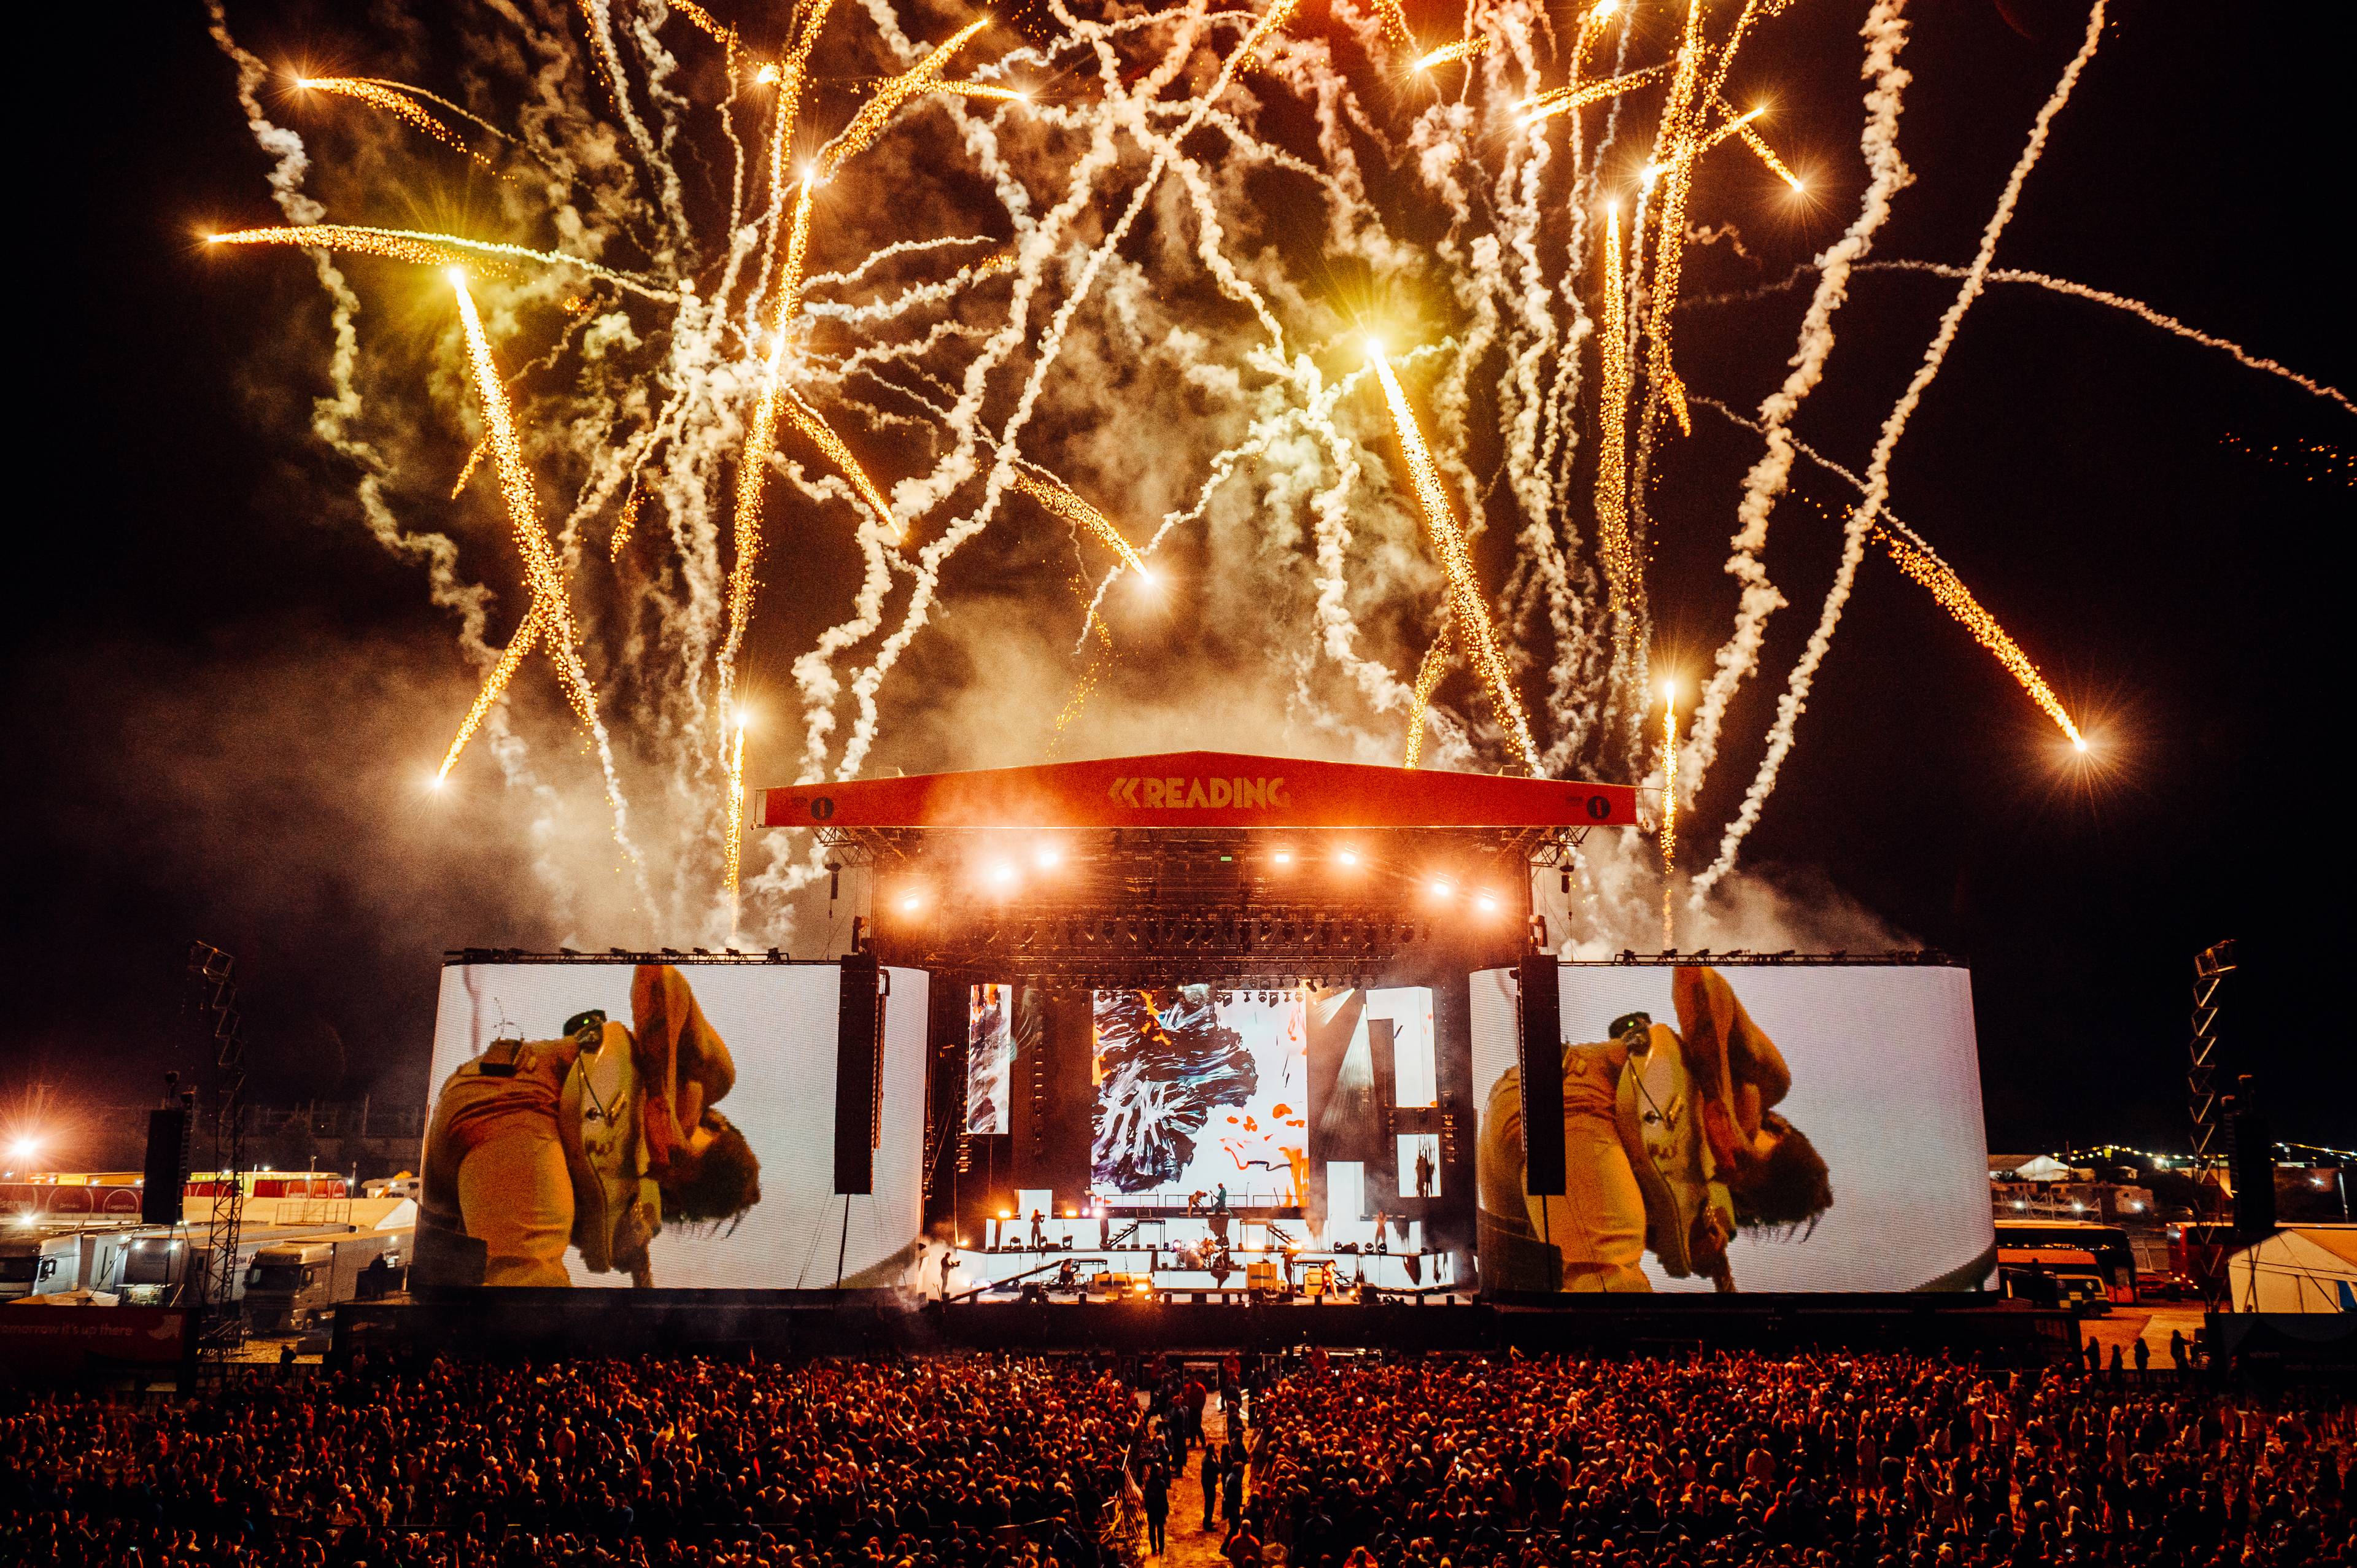 Reading festival stage at night with fireworks